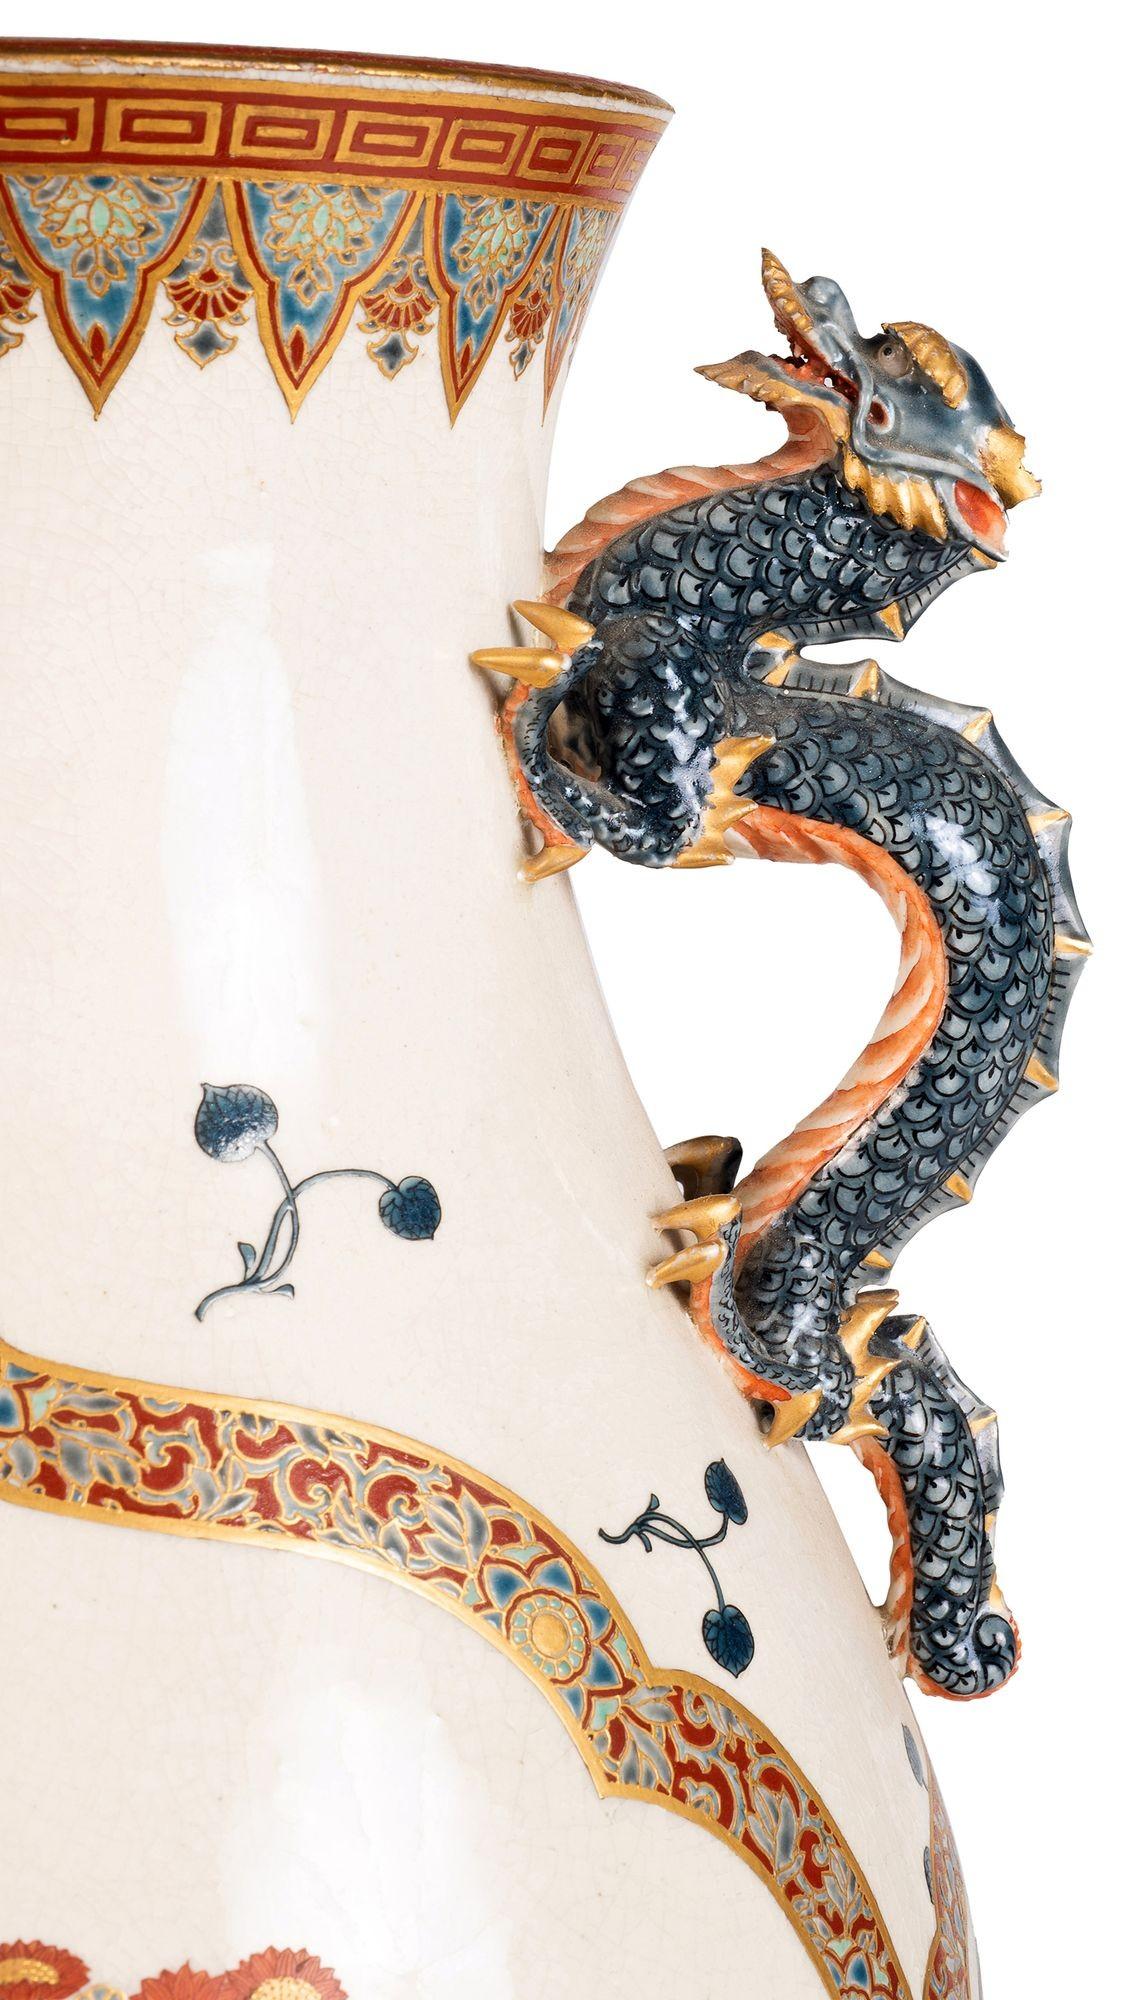 A fine quality Japanese Imperial Satsuma vase, having wonderful hand painted classical decoration of motifs, mythical Dragon handles to either side and an inset panel depicting blossom trees.

Batch 74 G9855/22 TNKZ